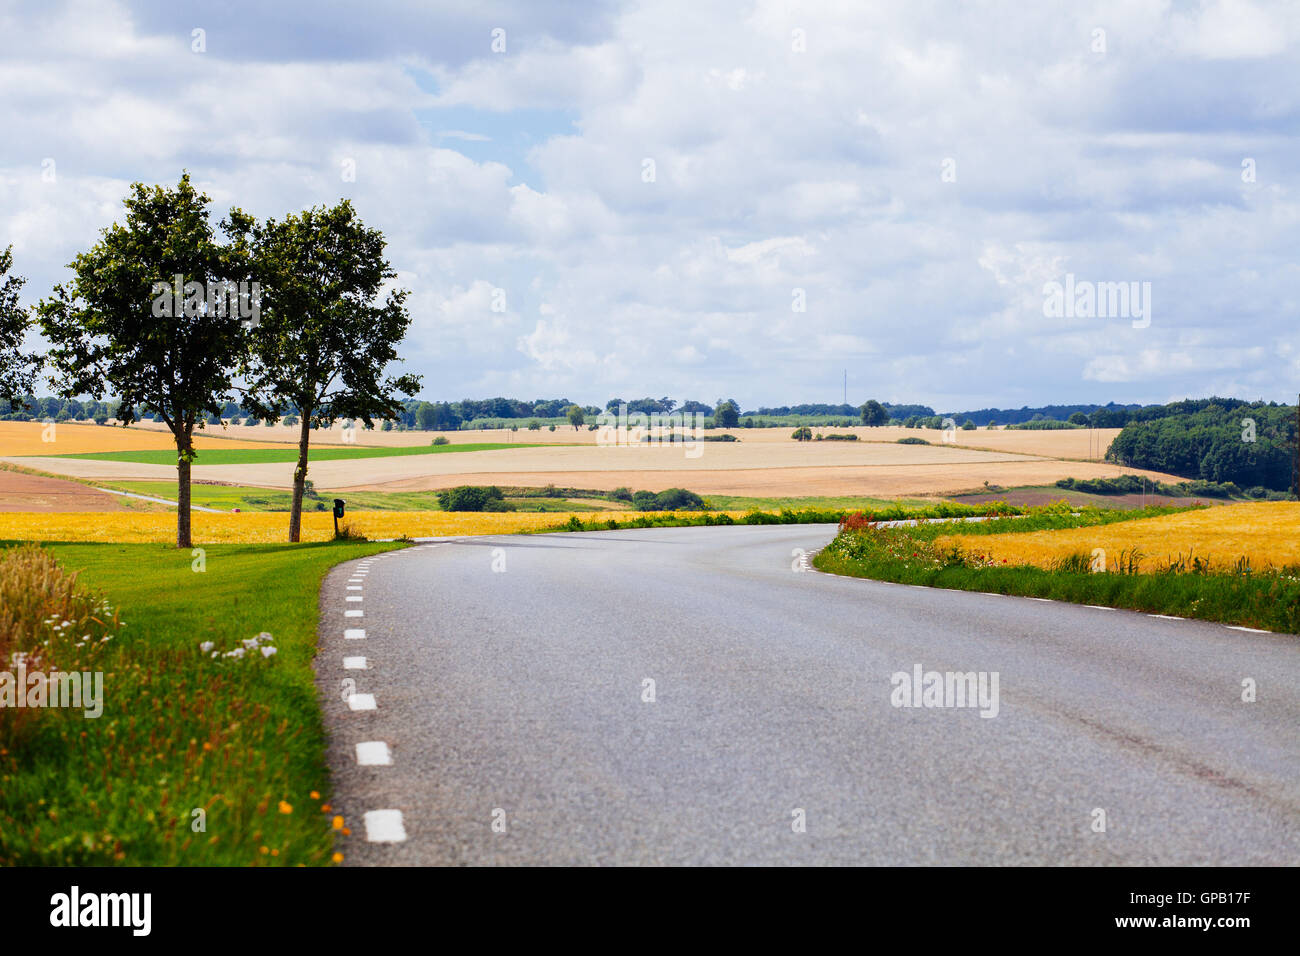 A view of the Skåne landscape from the side of the road. Stock Photo